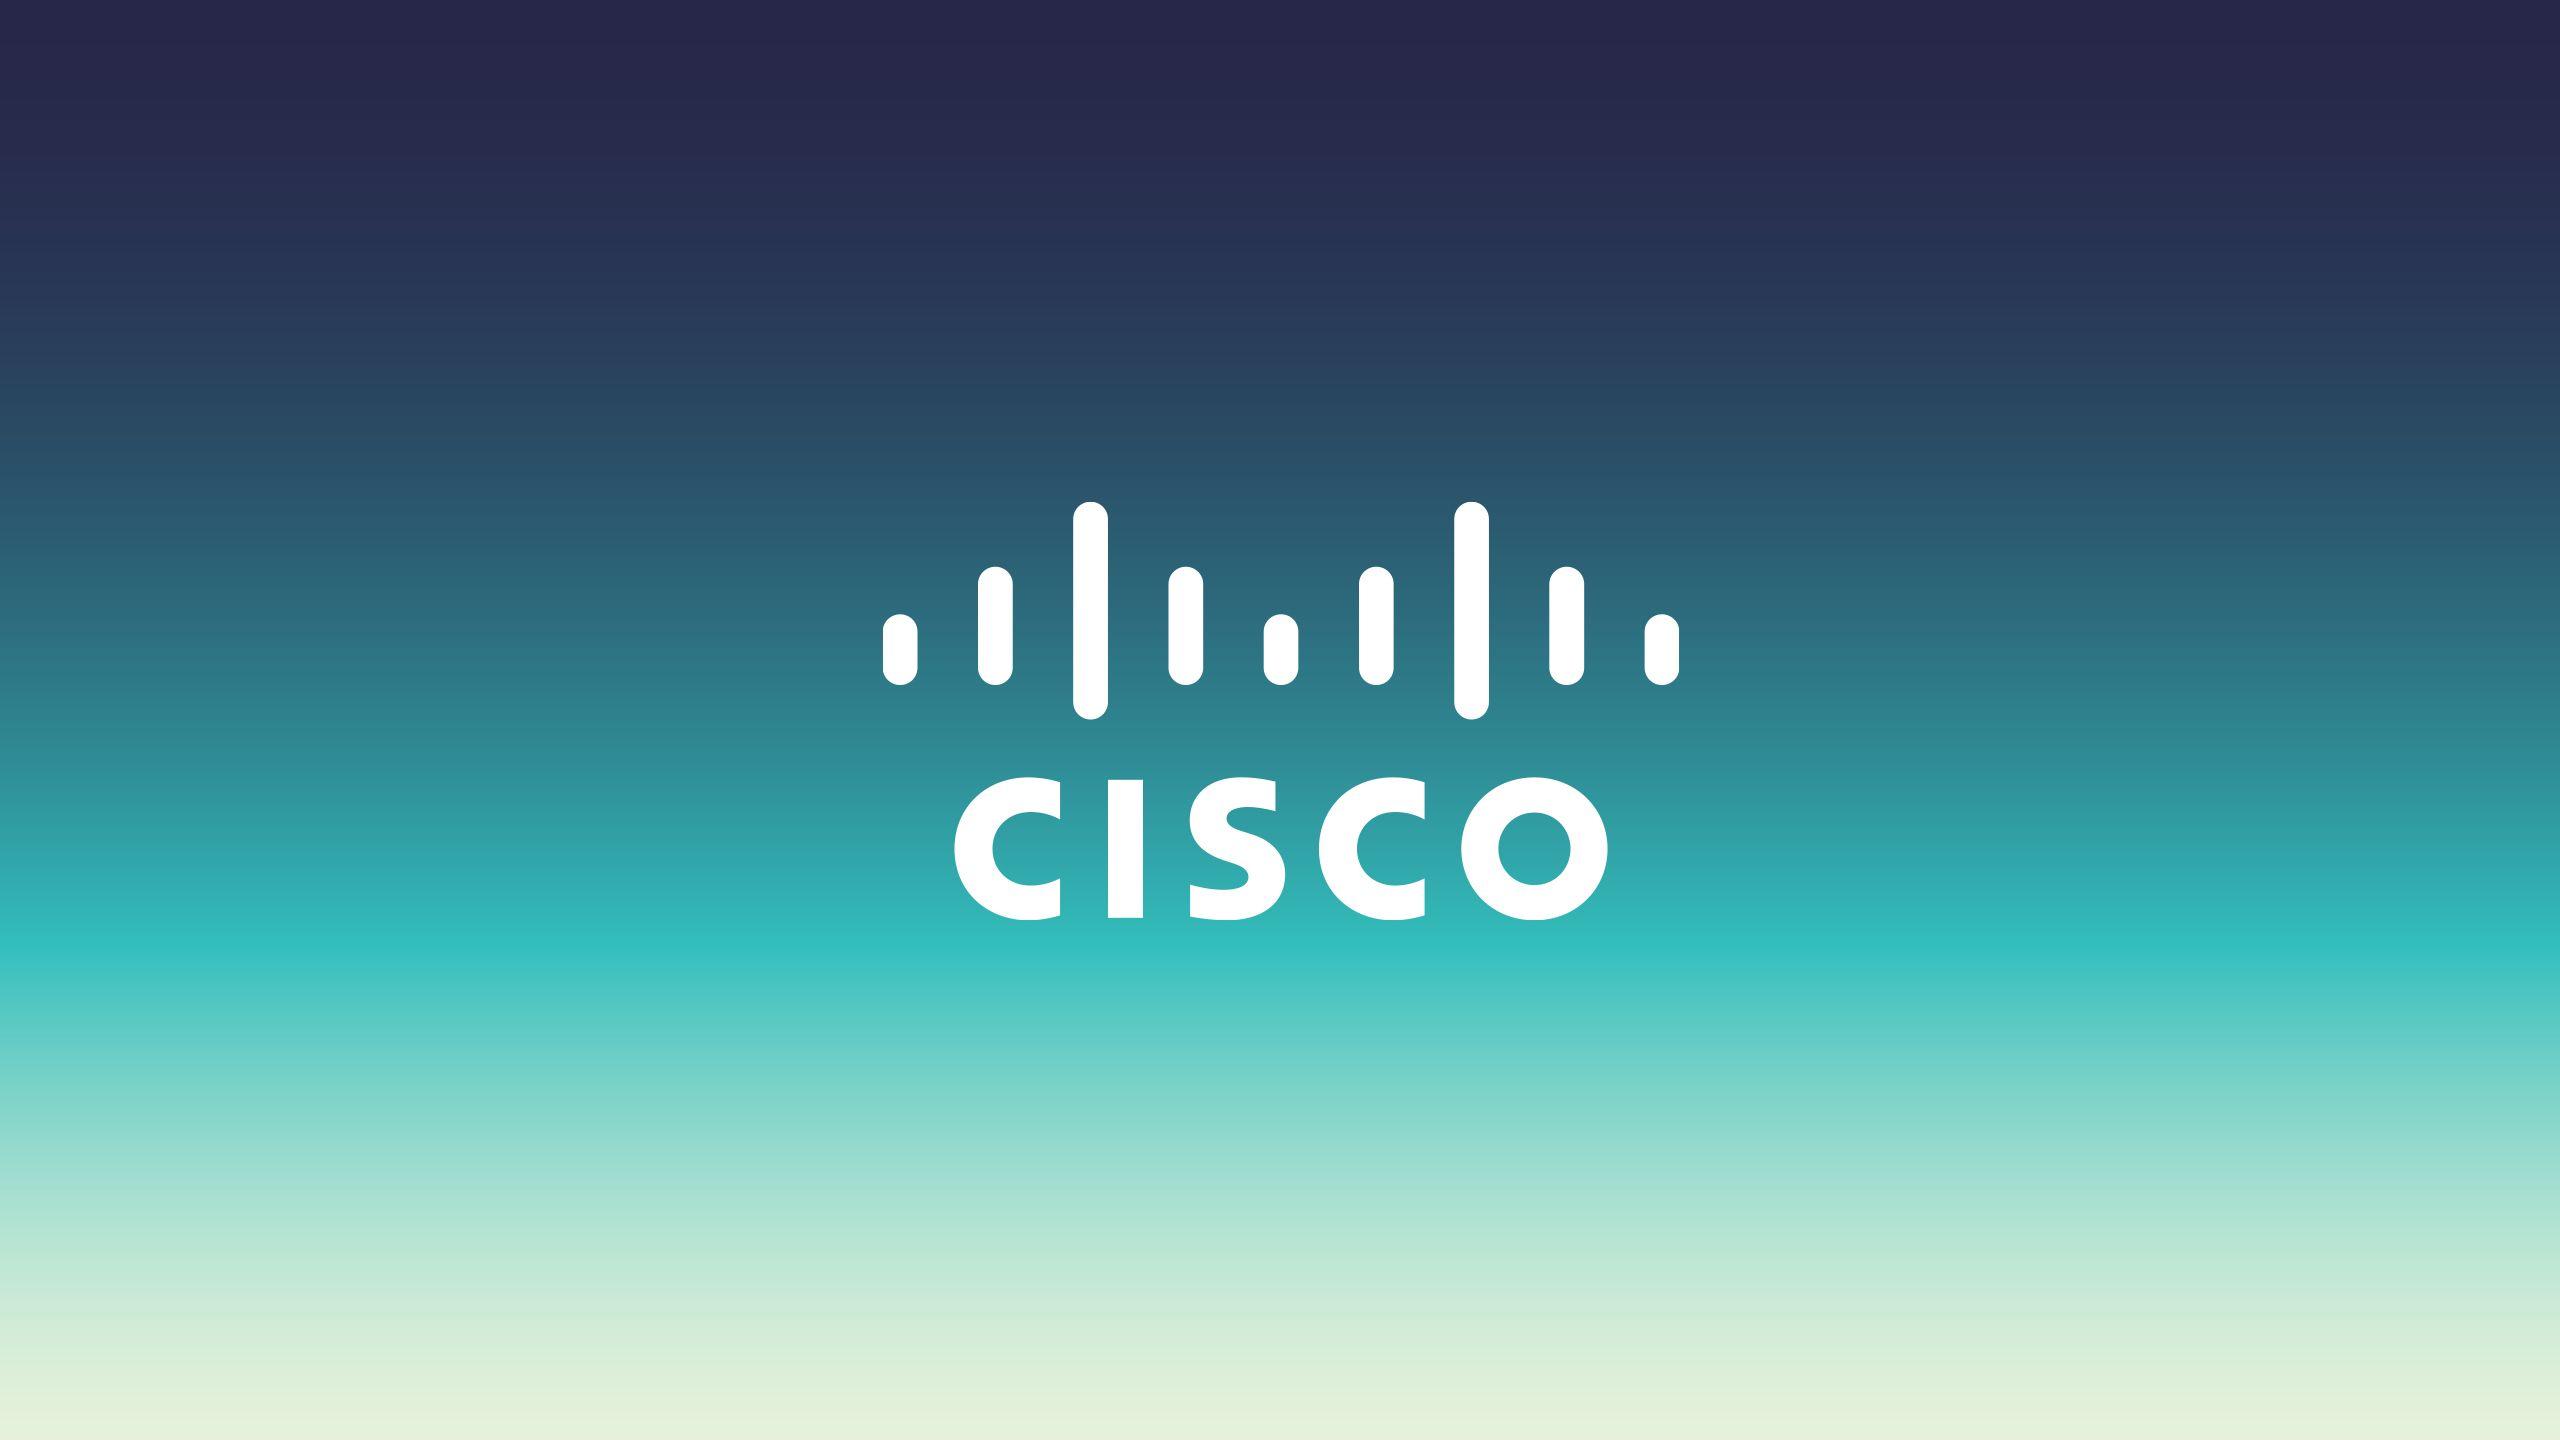 Cisco Wallpapers - Top Free Cisco Backgrounds - WallpaperAccess